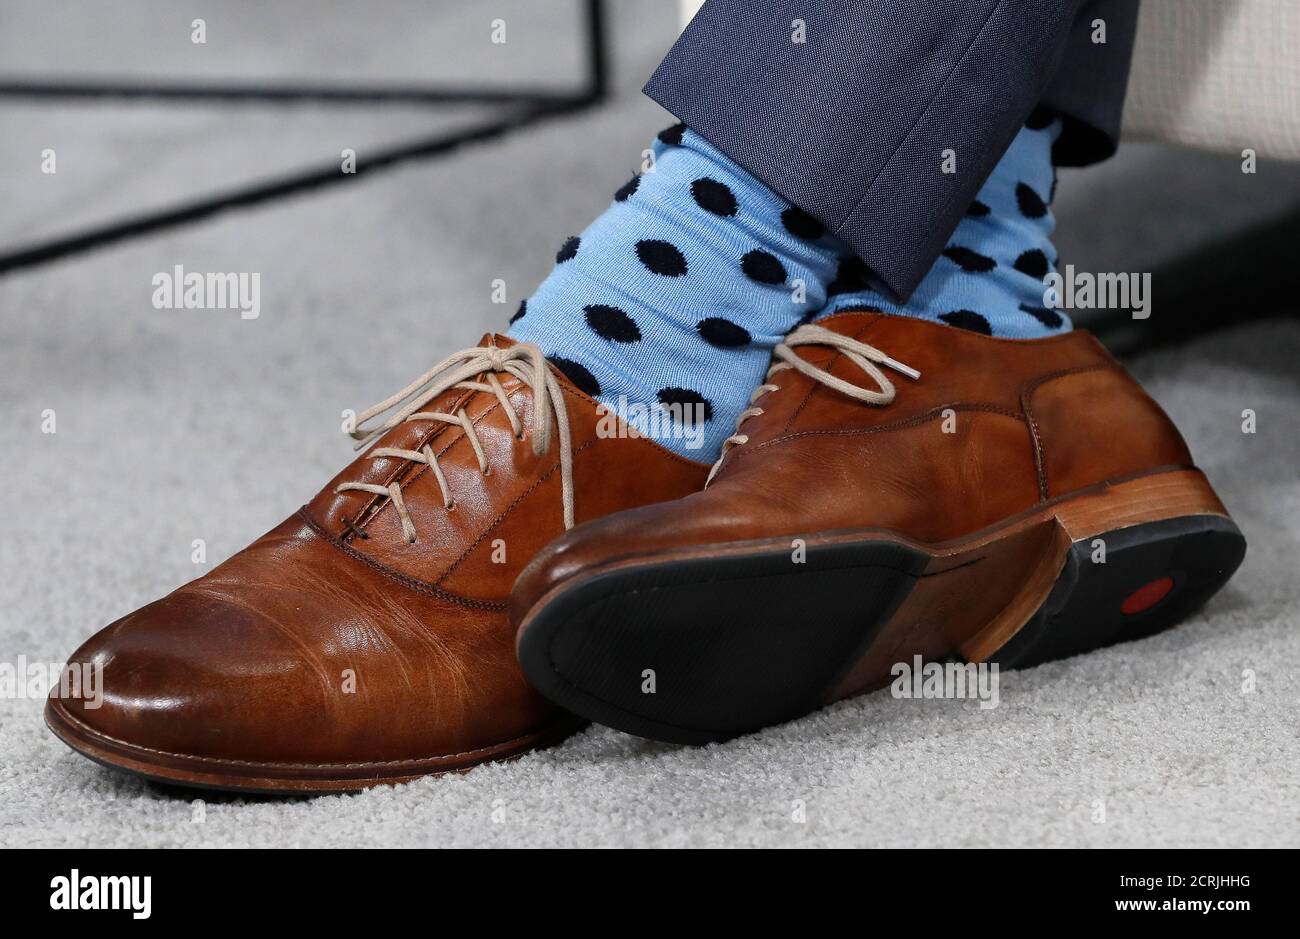 The shoes and socks of Canadian Prime Minister Justin Trudeau are seen  during a meeting with Argentina's President Mauricio Macri at a G7 Summit  in the Charlevoix town of La Malbaie, Quebec,